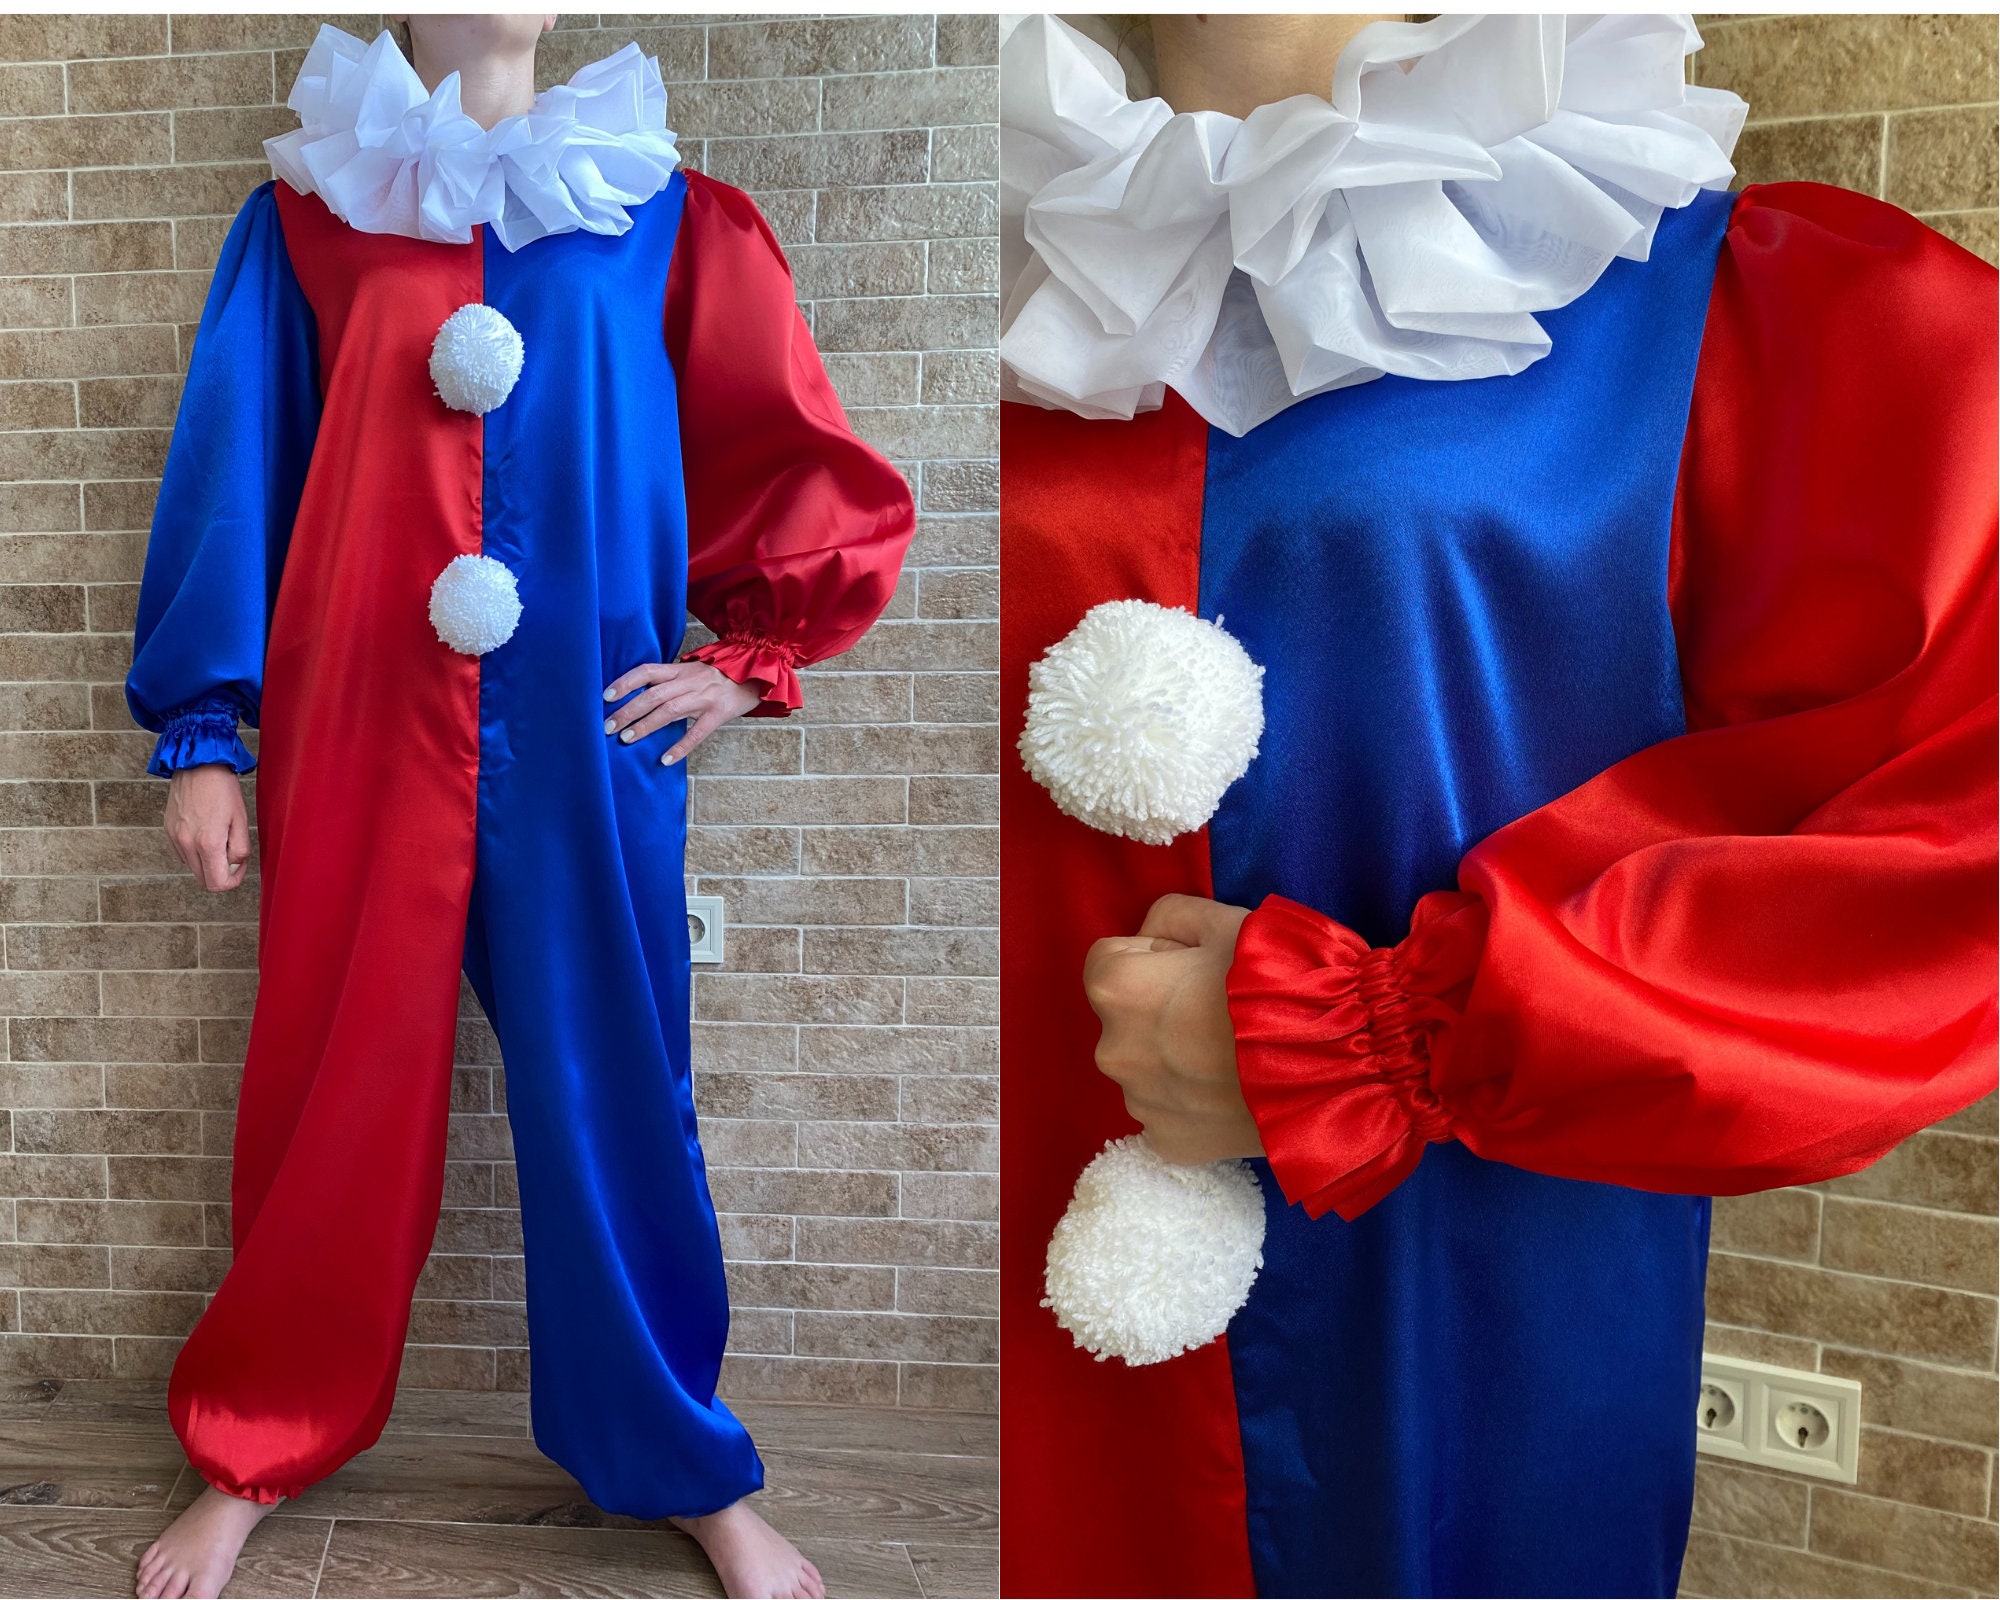 Blue-haired clown costume - wide 7